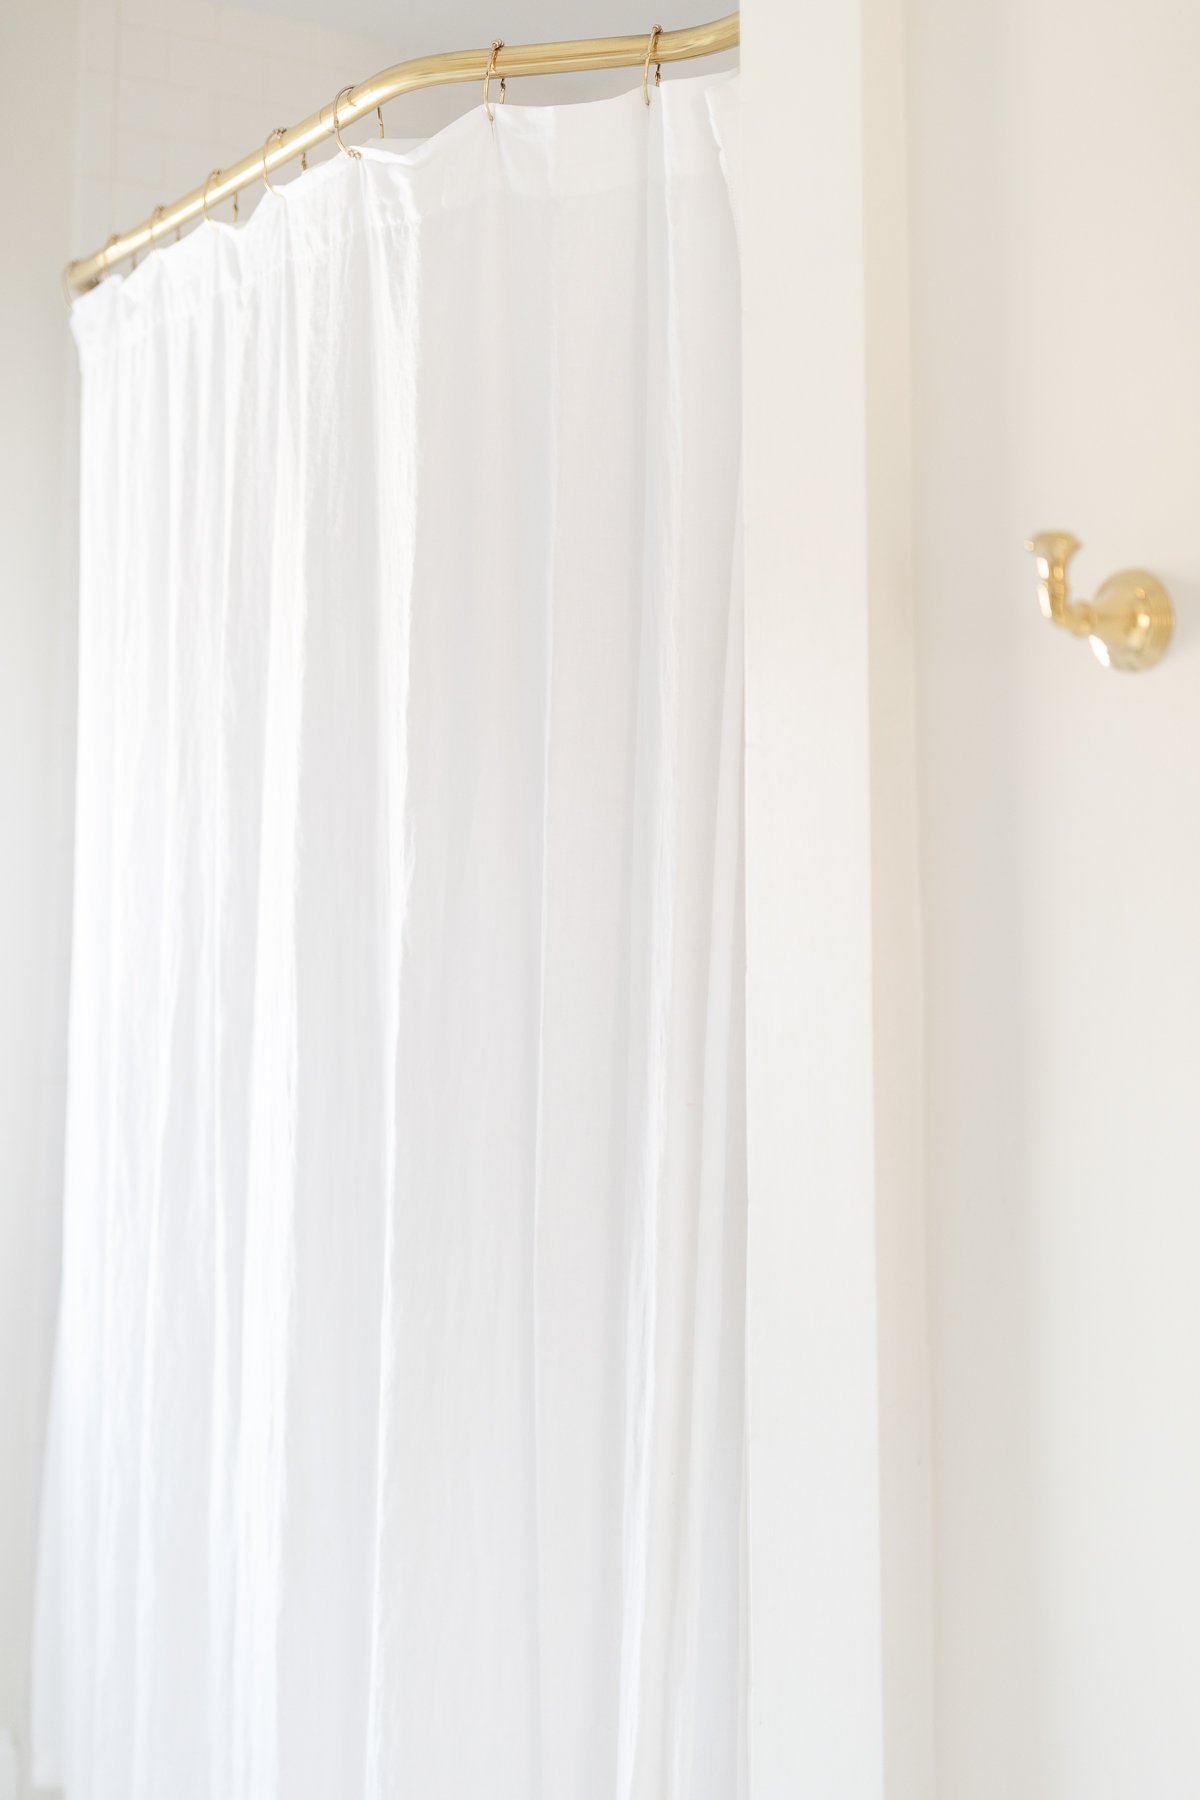 A white shower with a brass shower curtain rod.